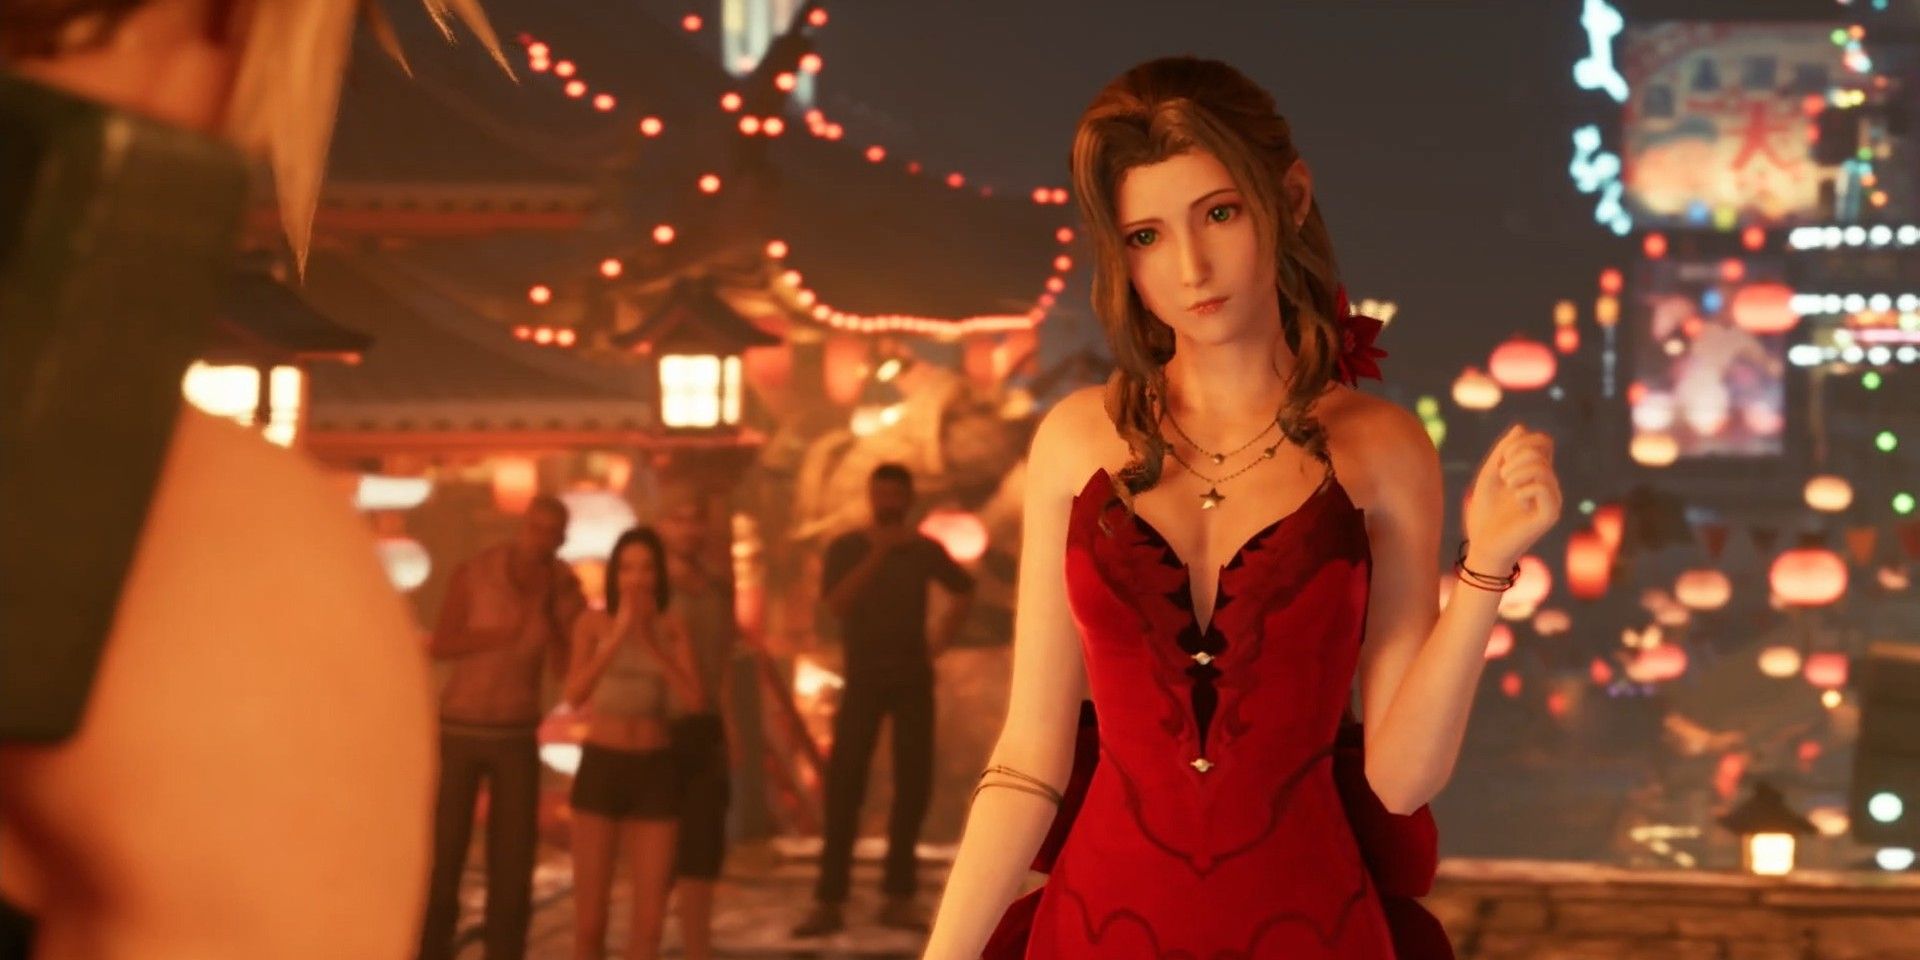 Aerith Gainsborough in her red dress in Final Fantasy 7 Remake